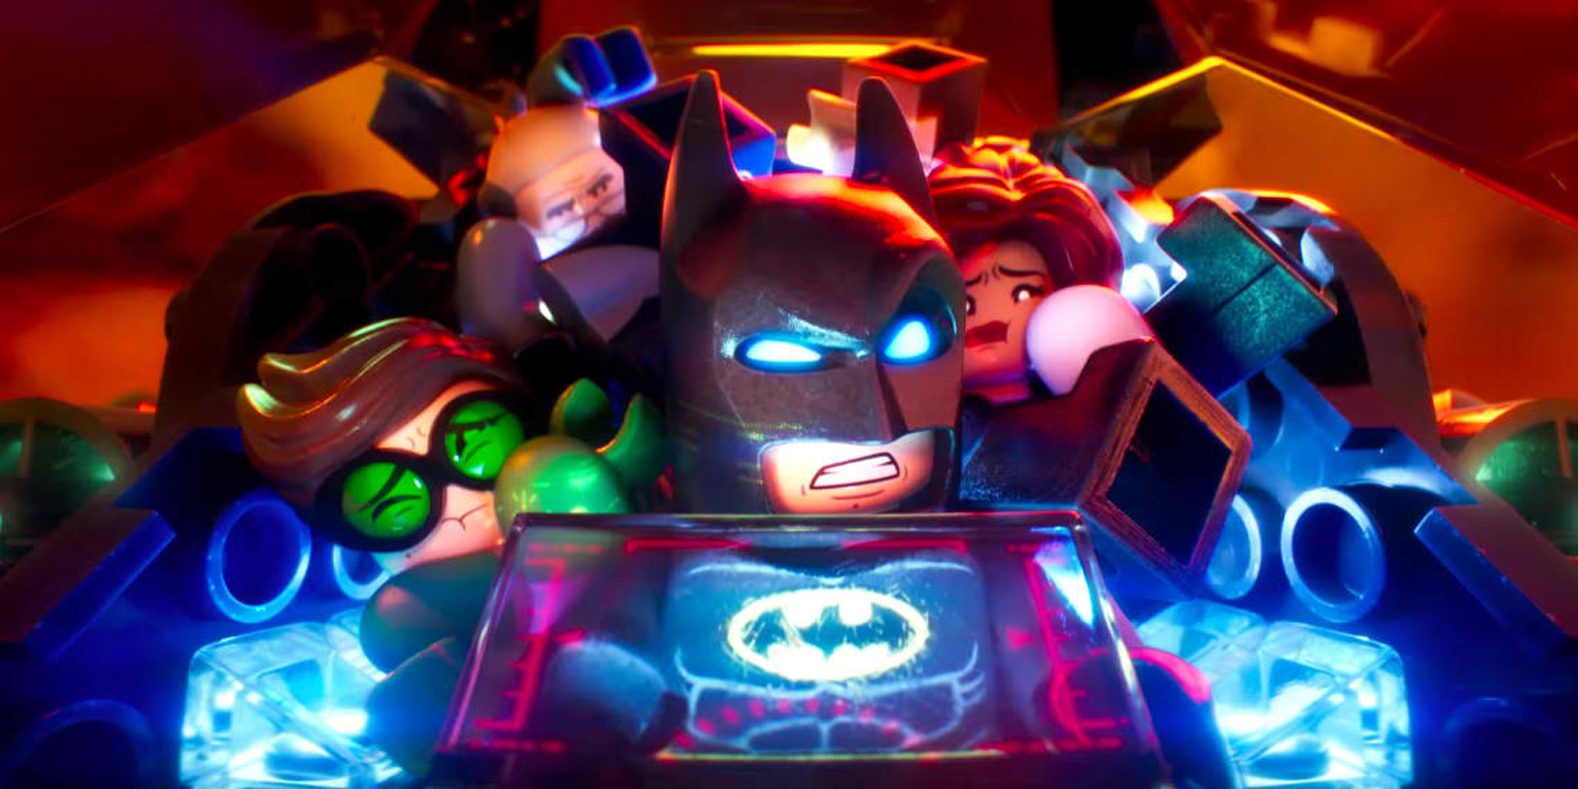 ‘The LEGO Batman Movie’ review: Taking silliness seriously